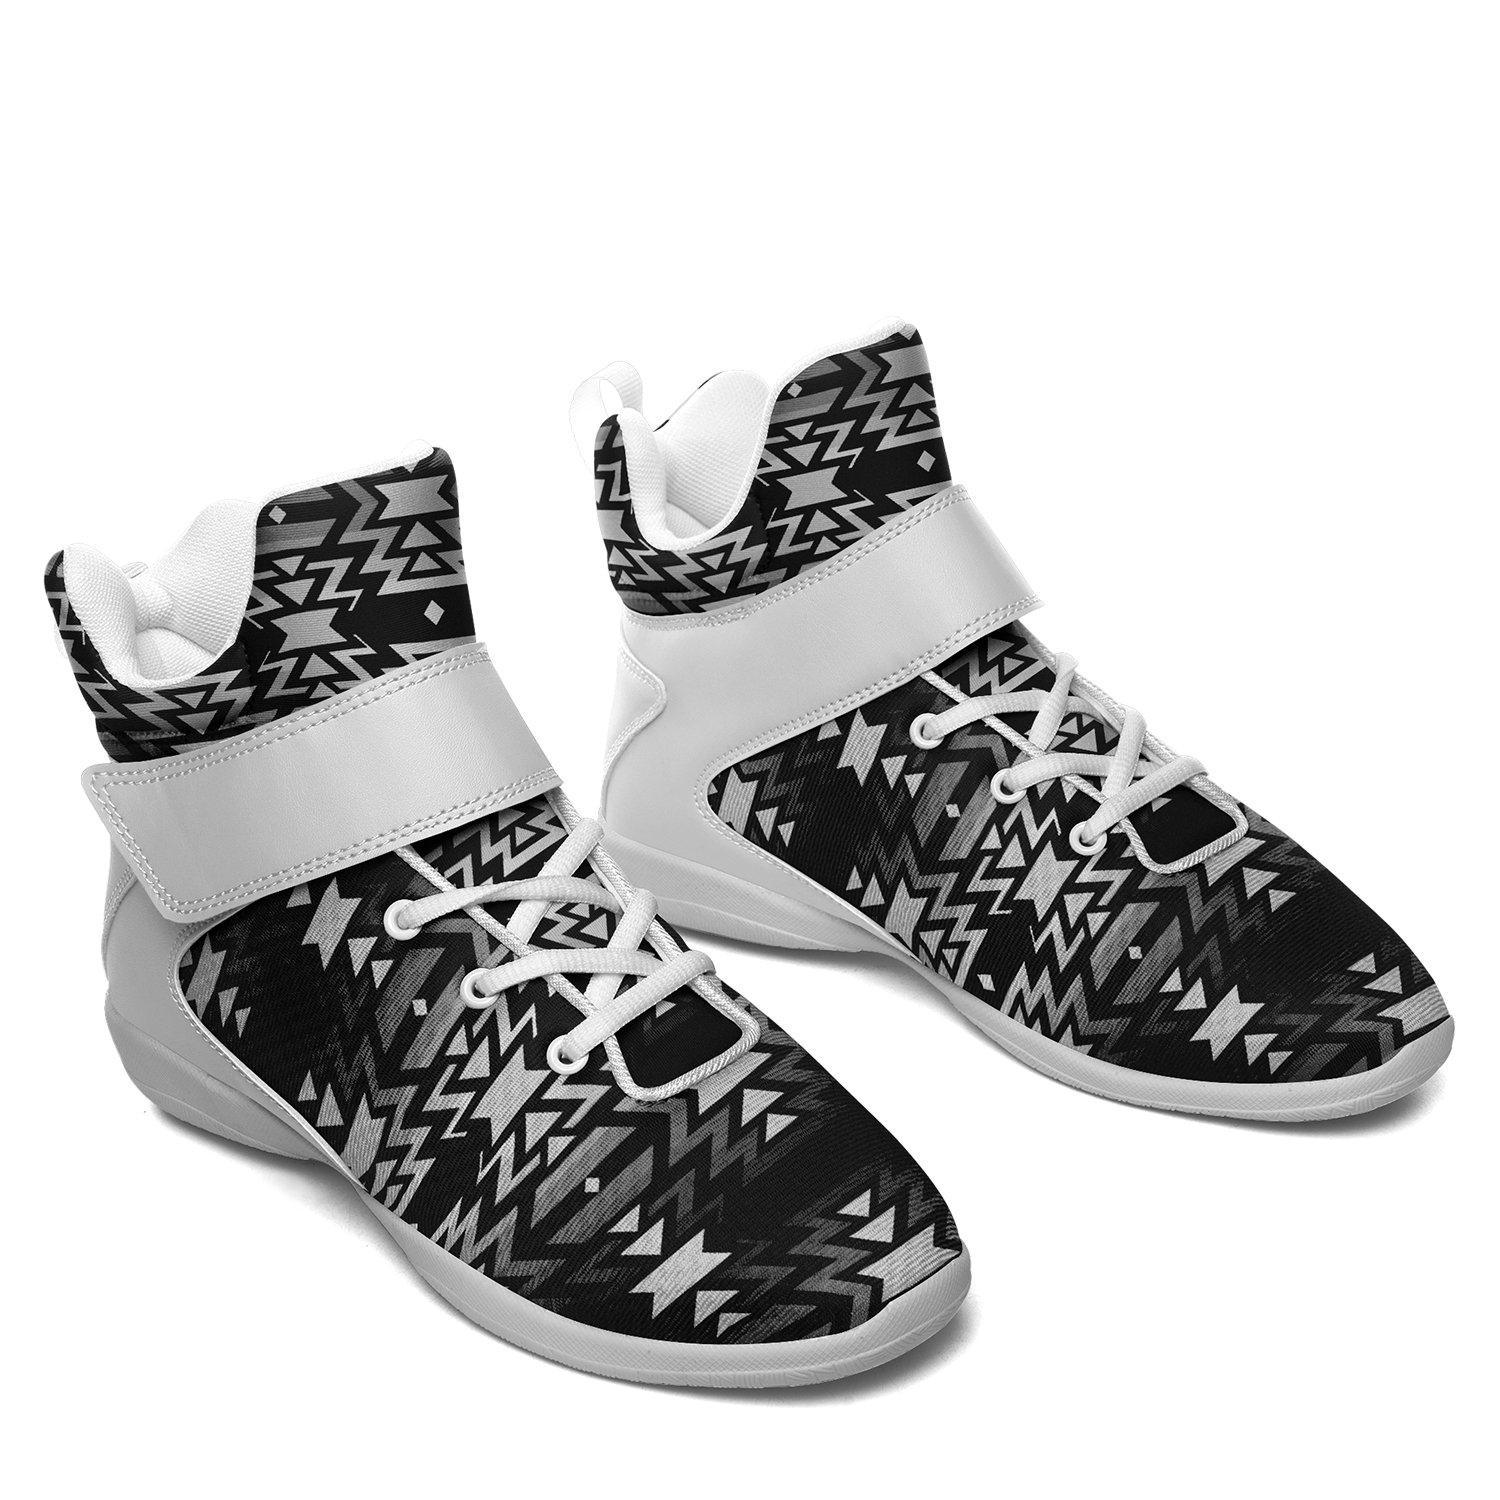 Black Fire Black and White Kid's Ipottaa Basketball / Sport High Top Shoes 49 Dzine 